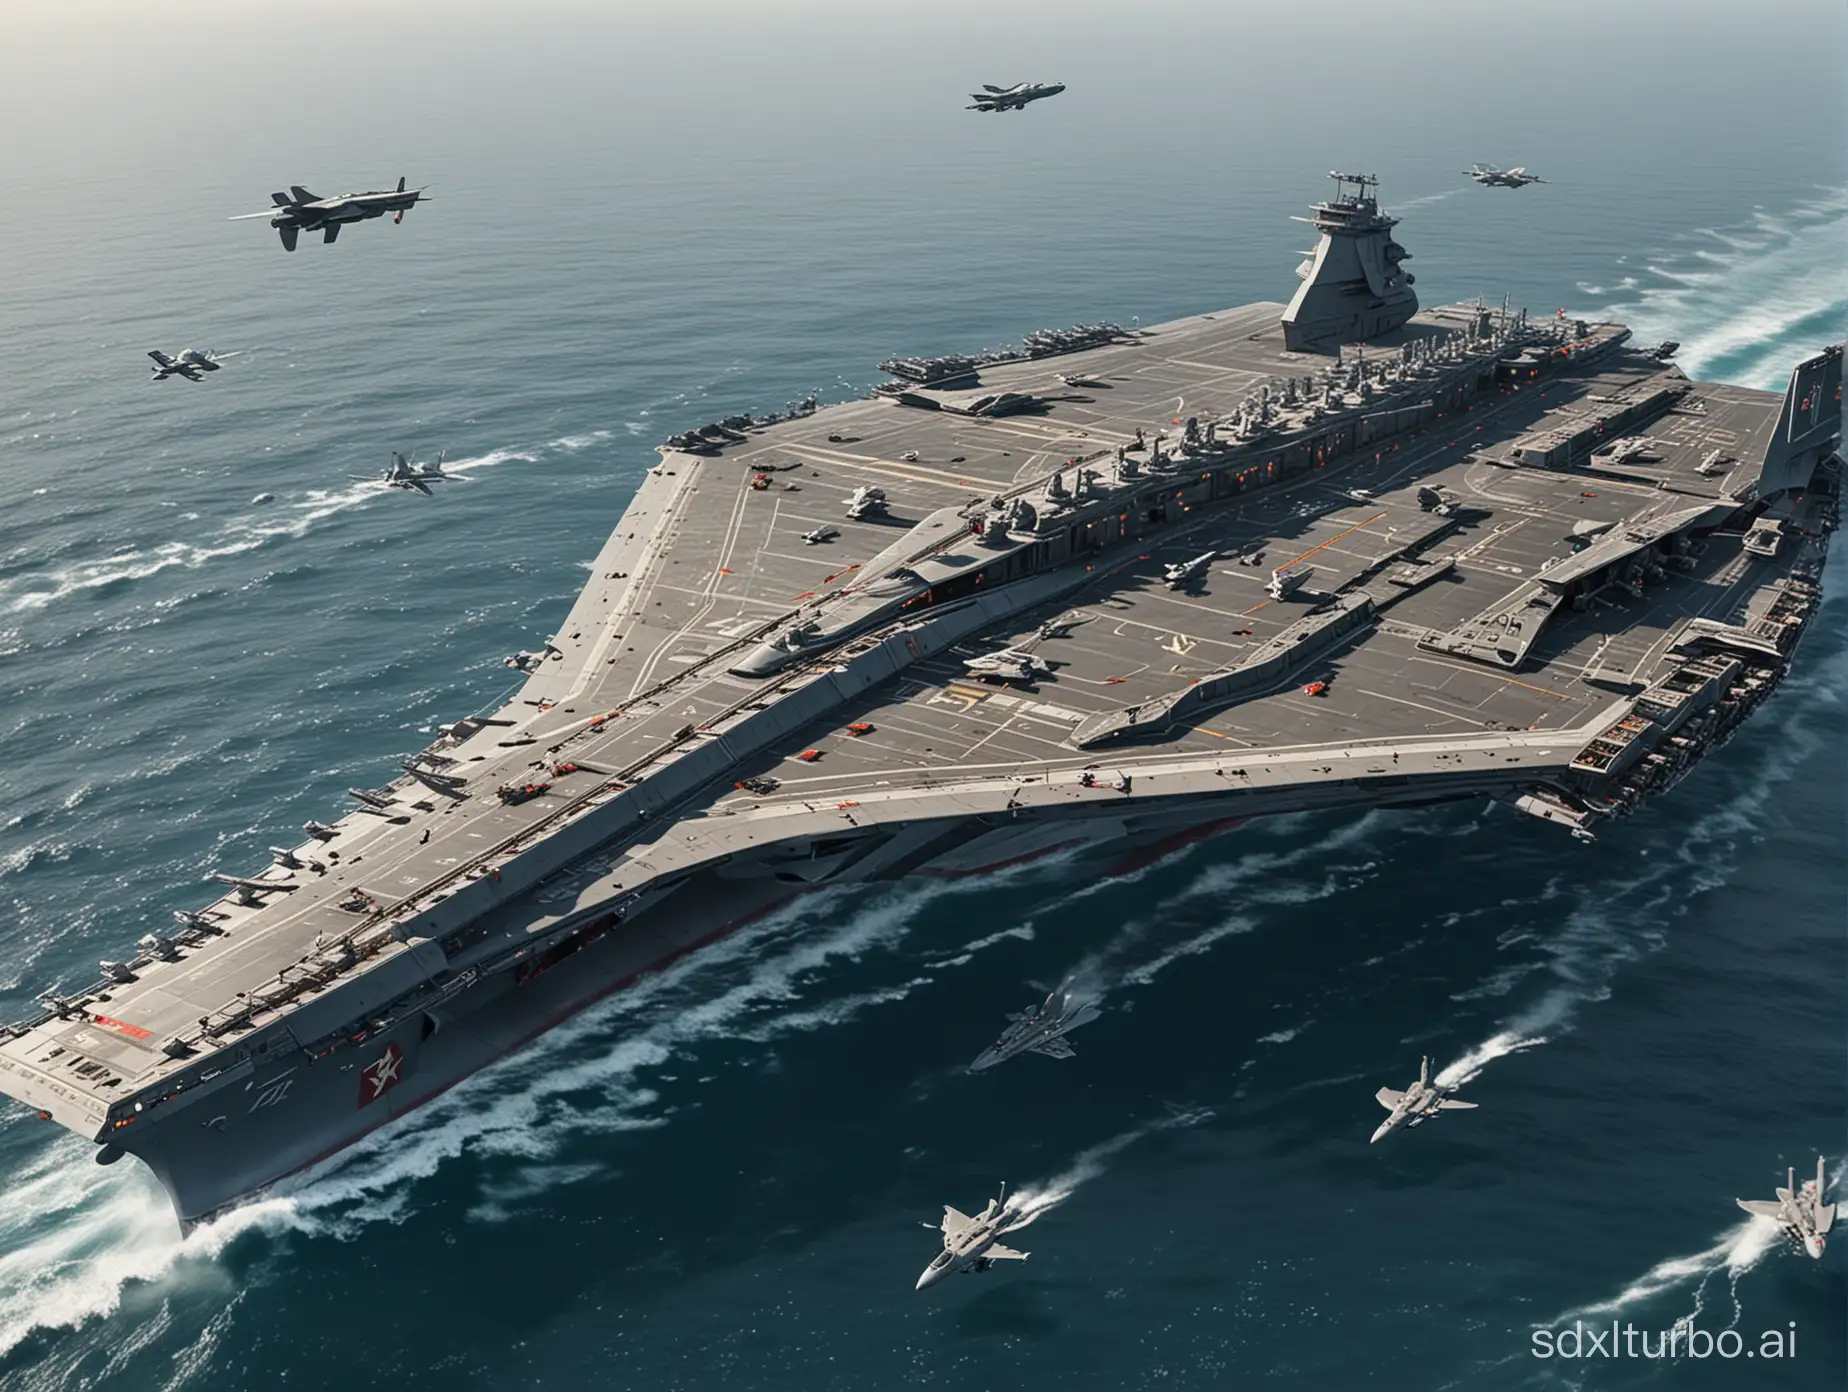 Futuristic-Flying-Aircraft-Carrier-with-Chinese-Architectural-Influence-and-Attack-Drones